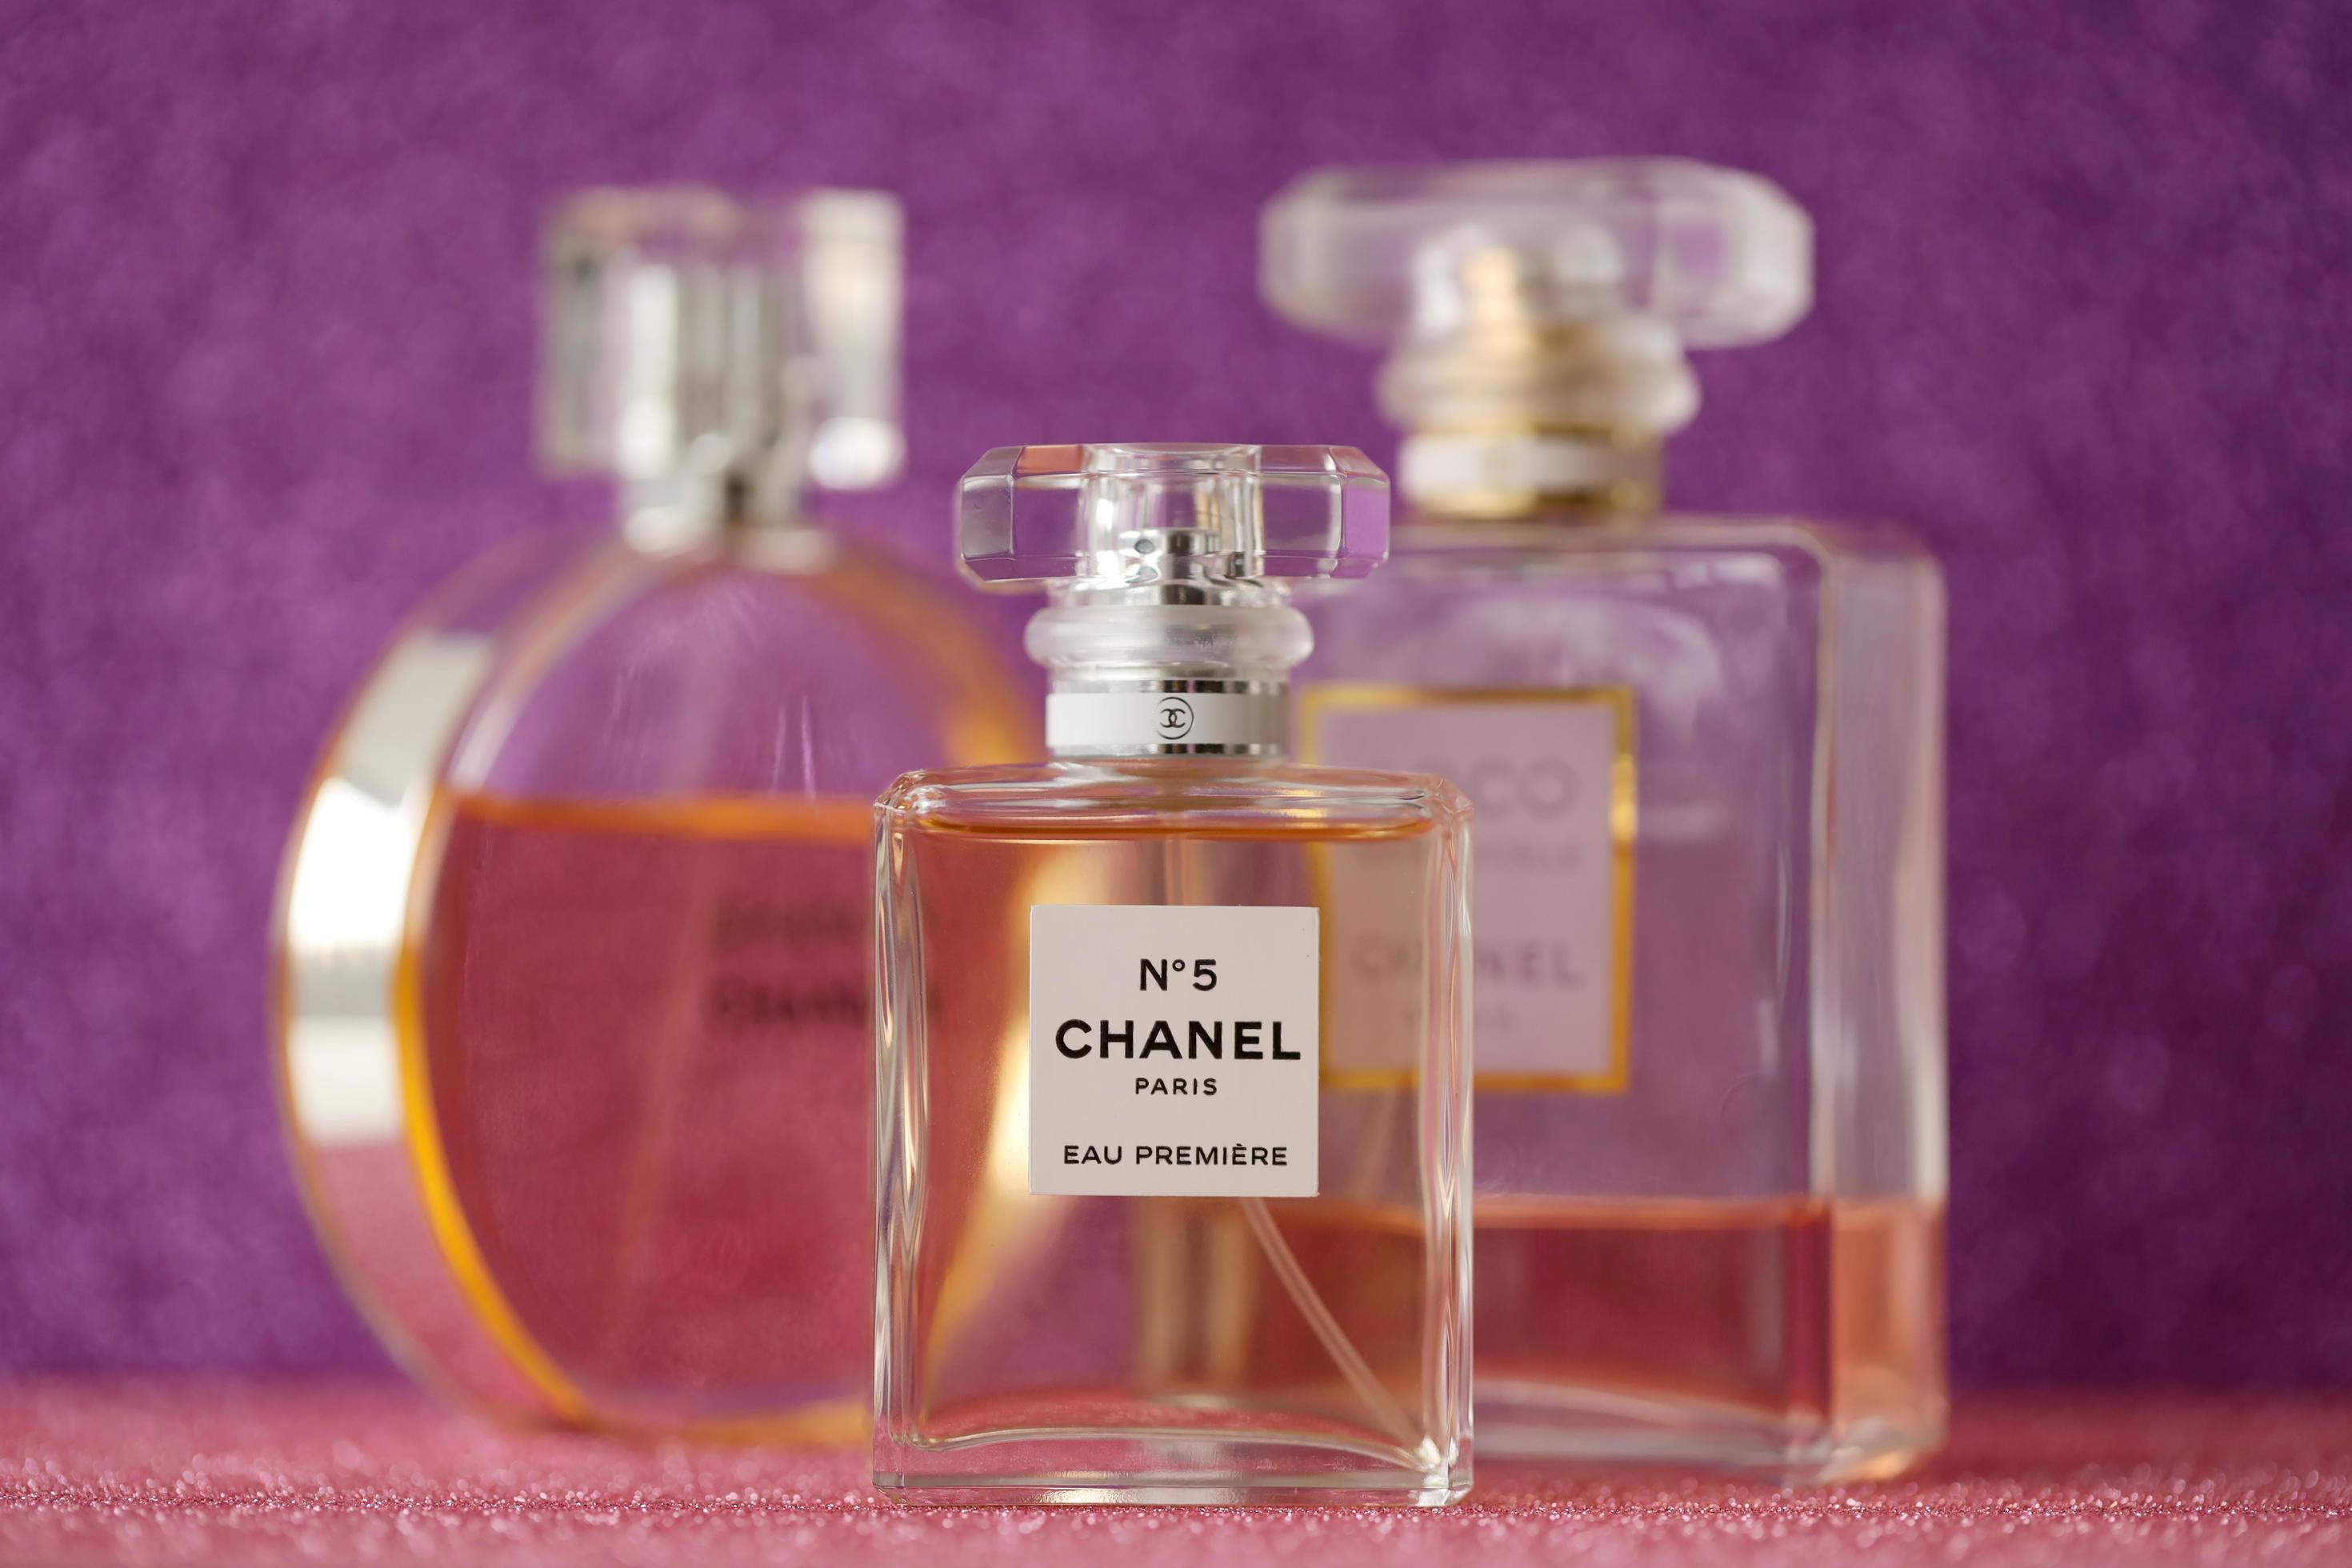 TERNOPIL, UKRAINE - SEPTEMBER 2, 2022 Chanel Number 5 Eau Premiere  worldwide famous french perfume bottle among other perfumes on shiny  glitter background in purple colors 12887368 Stock Photo at Vecteezy